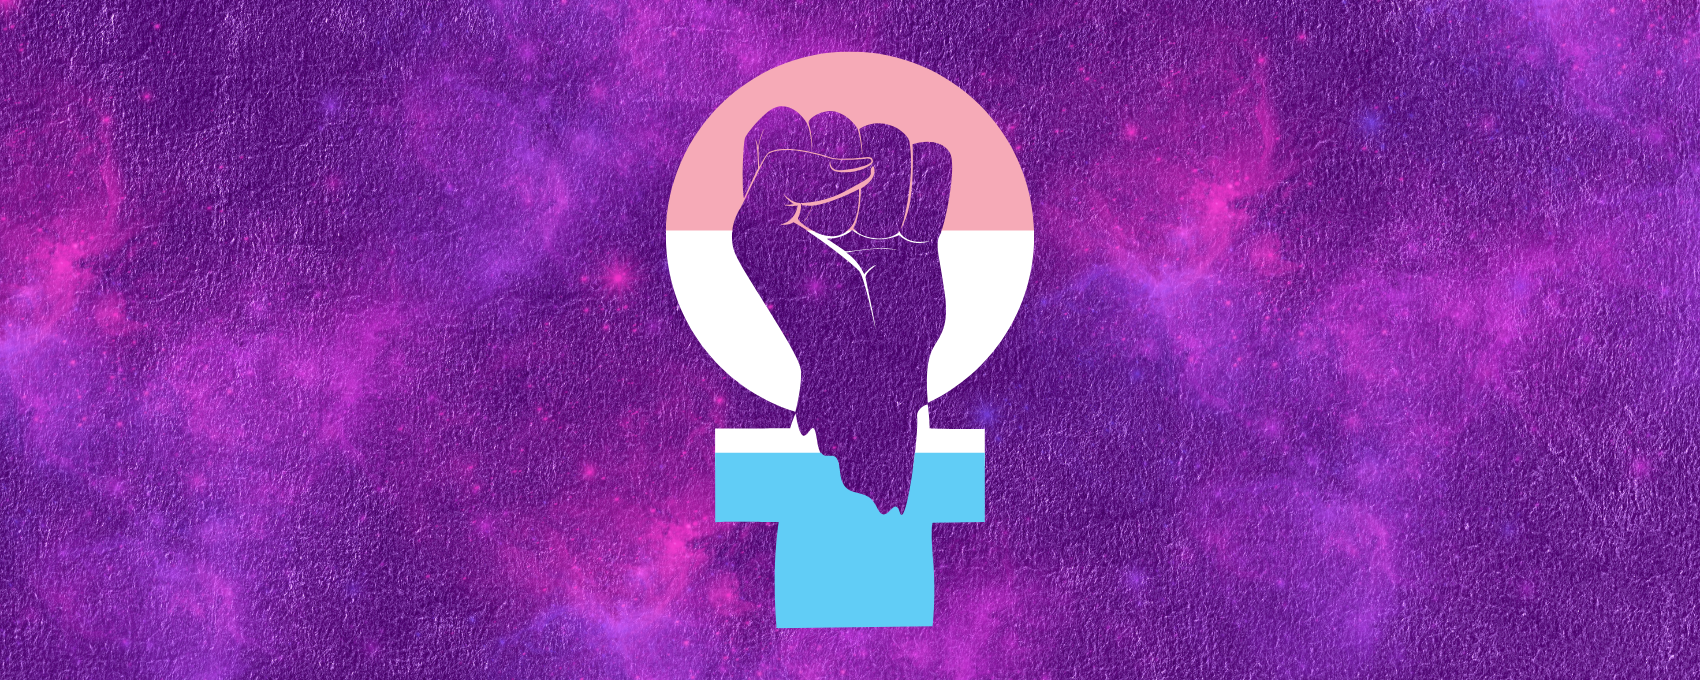 International Women’s Day: Commit to feminism that is intersectional, anti-racist, and trans-inclusive